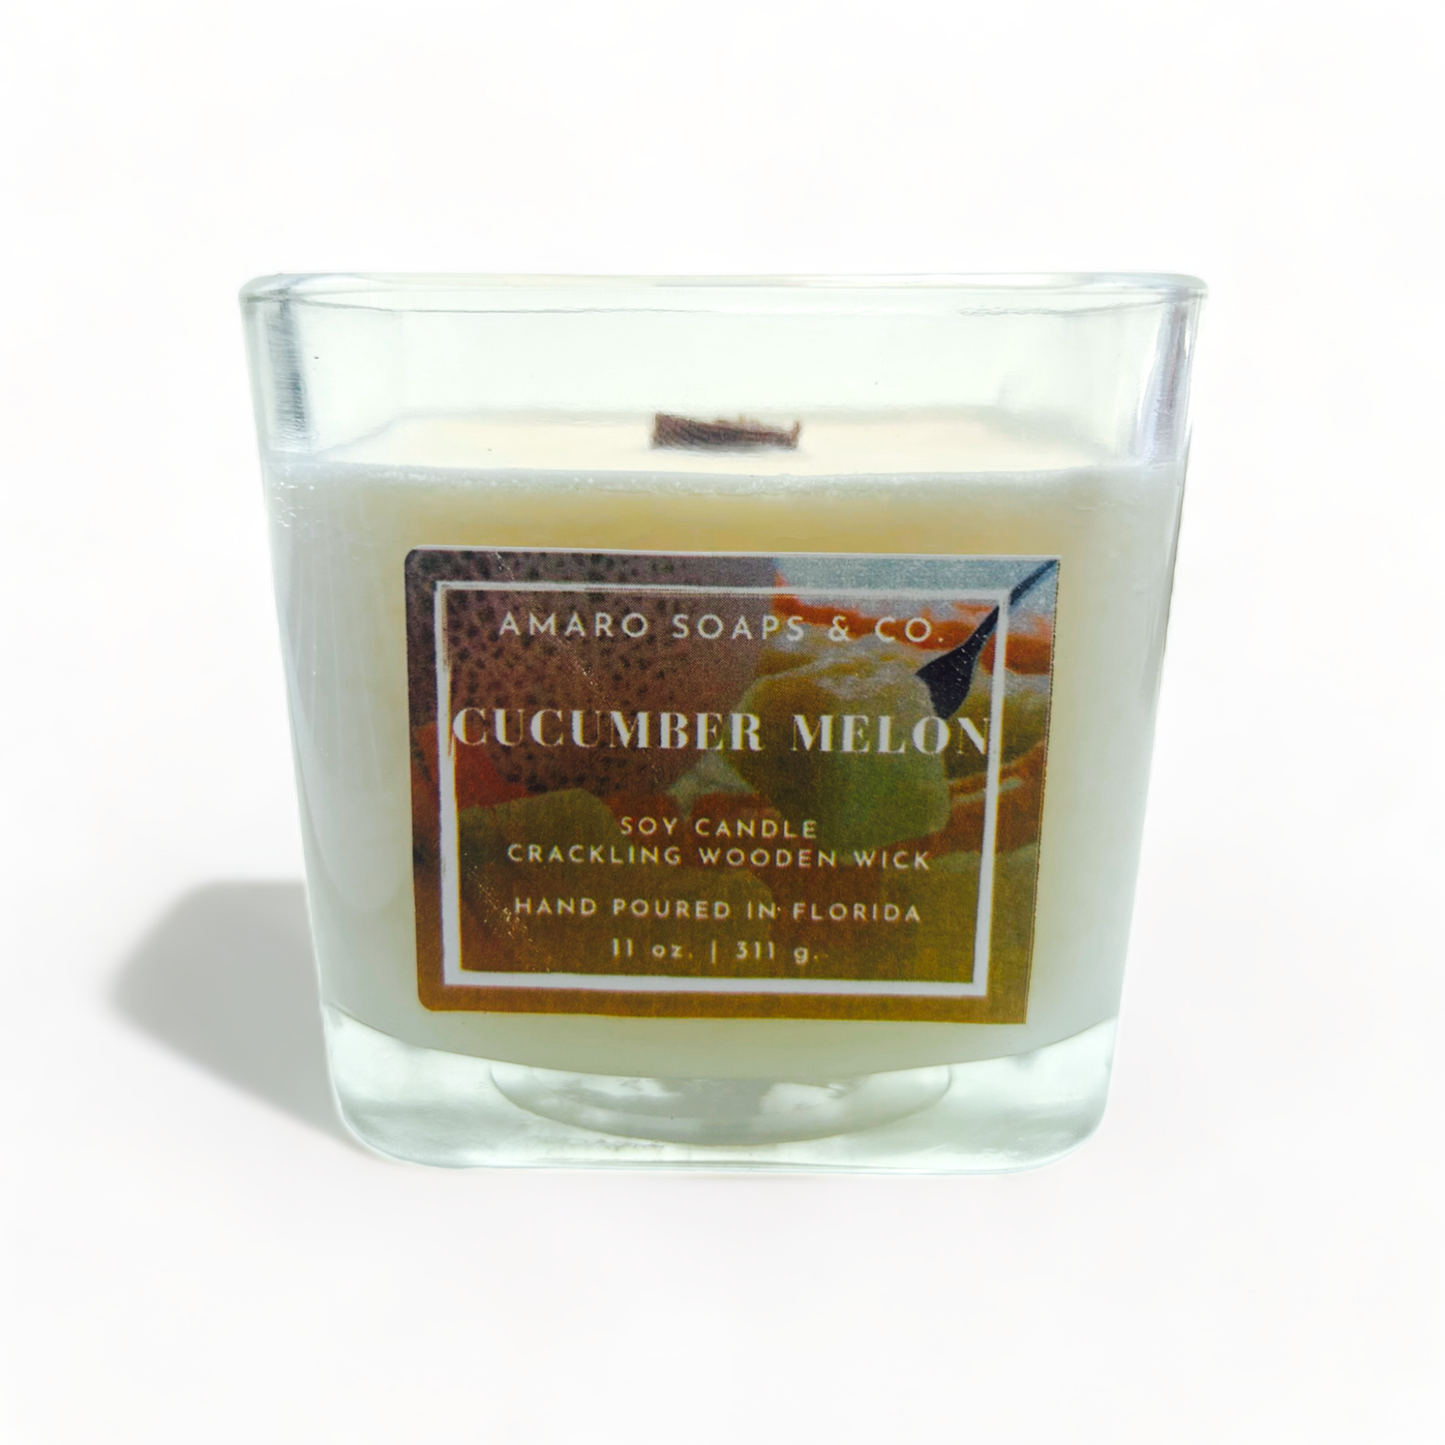 Cucumber Melon Wooden Wick Soy Candle